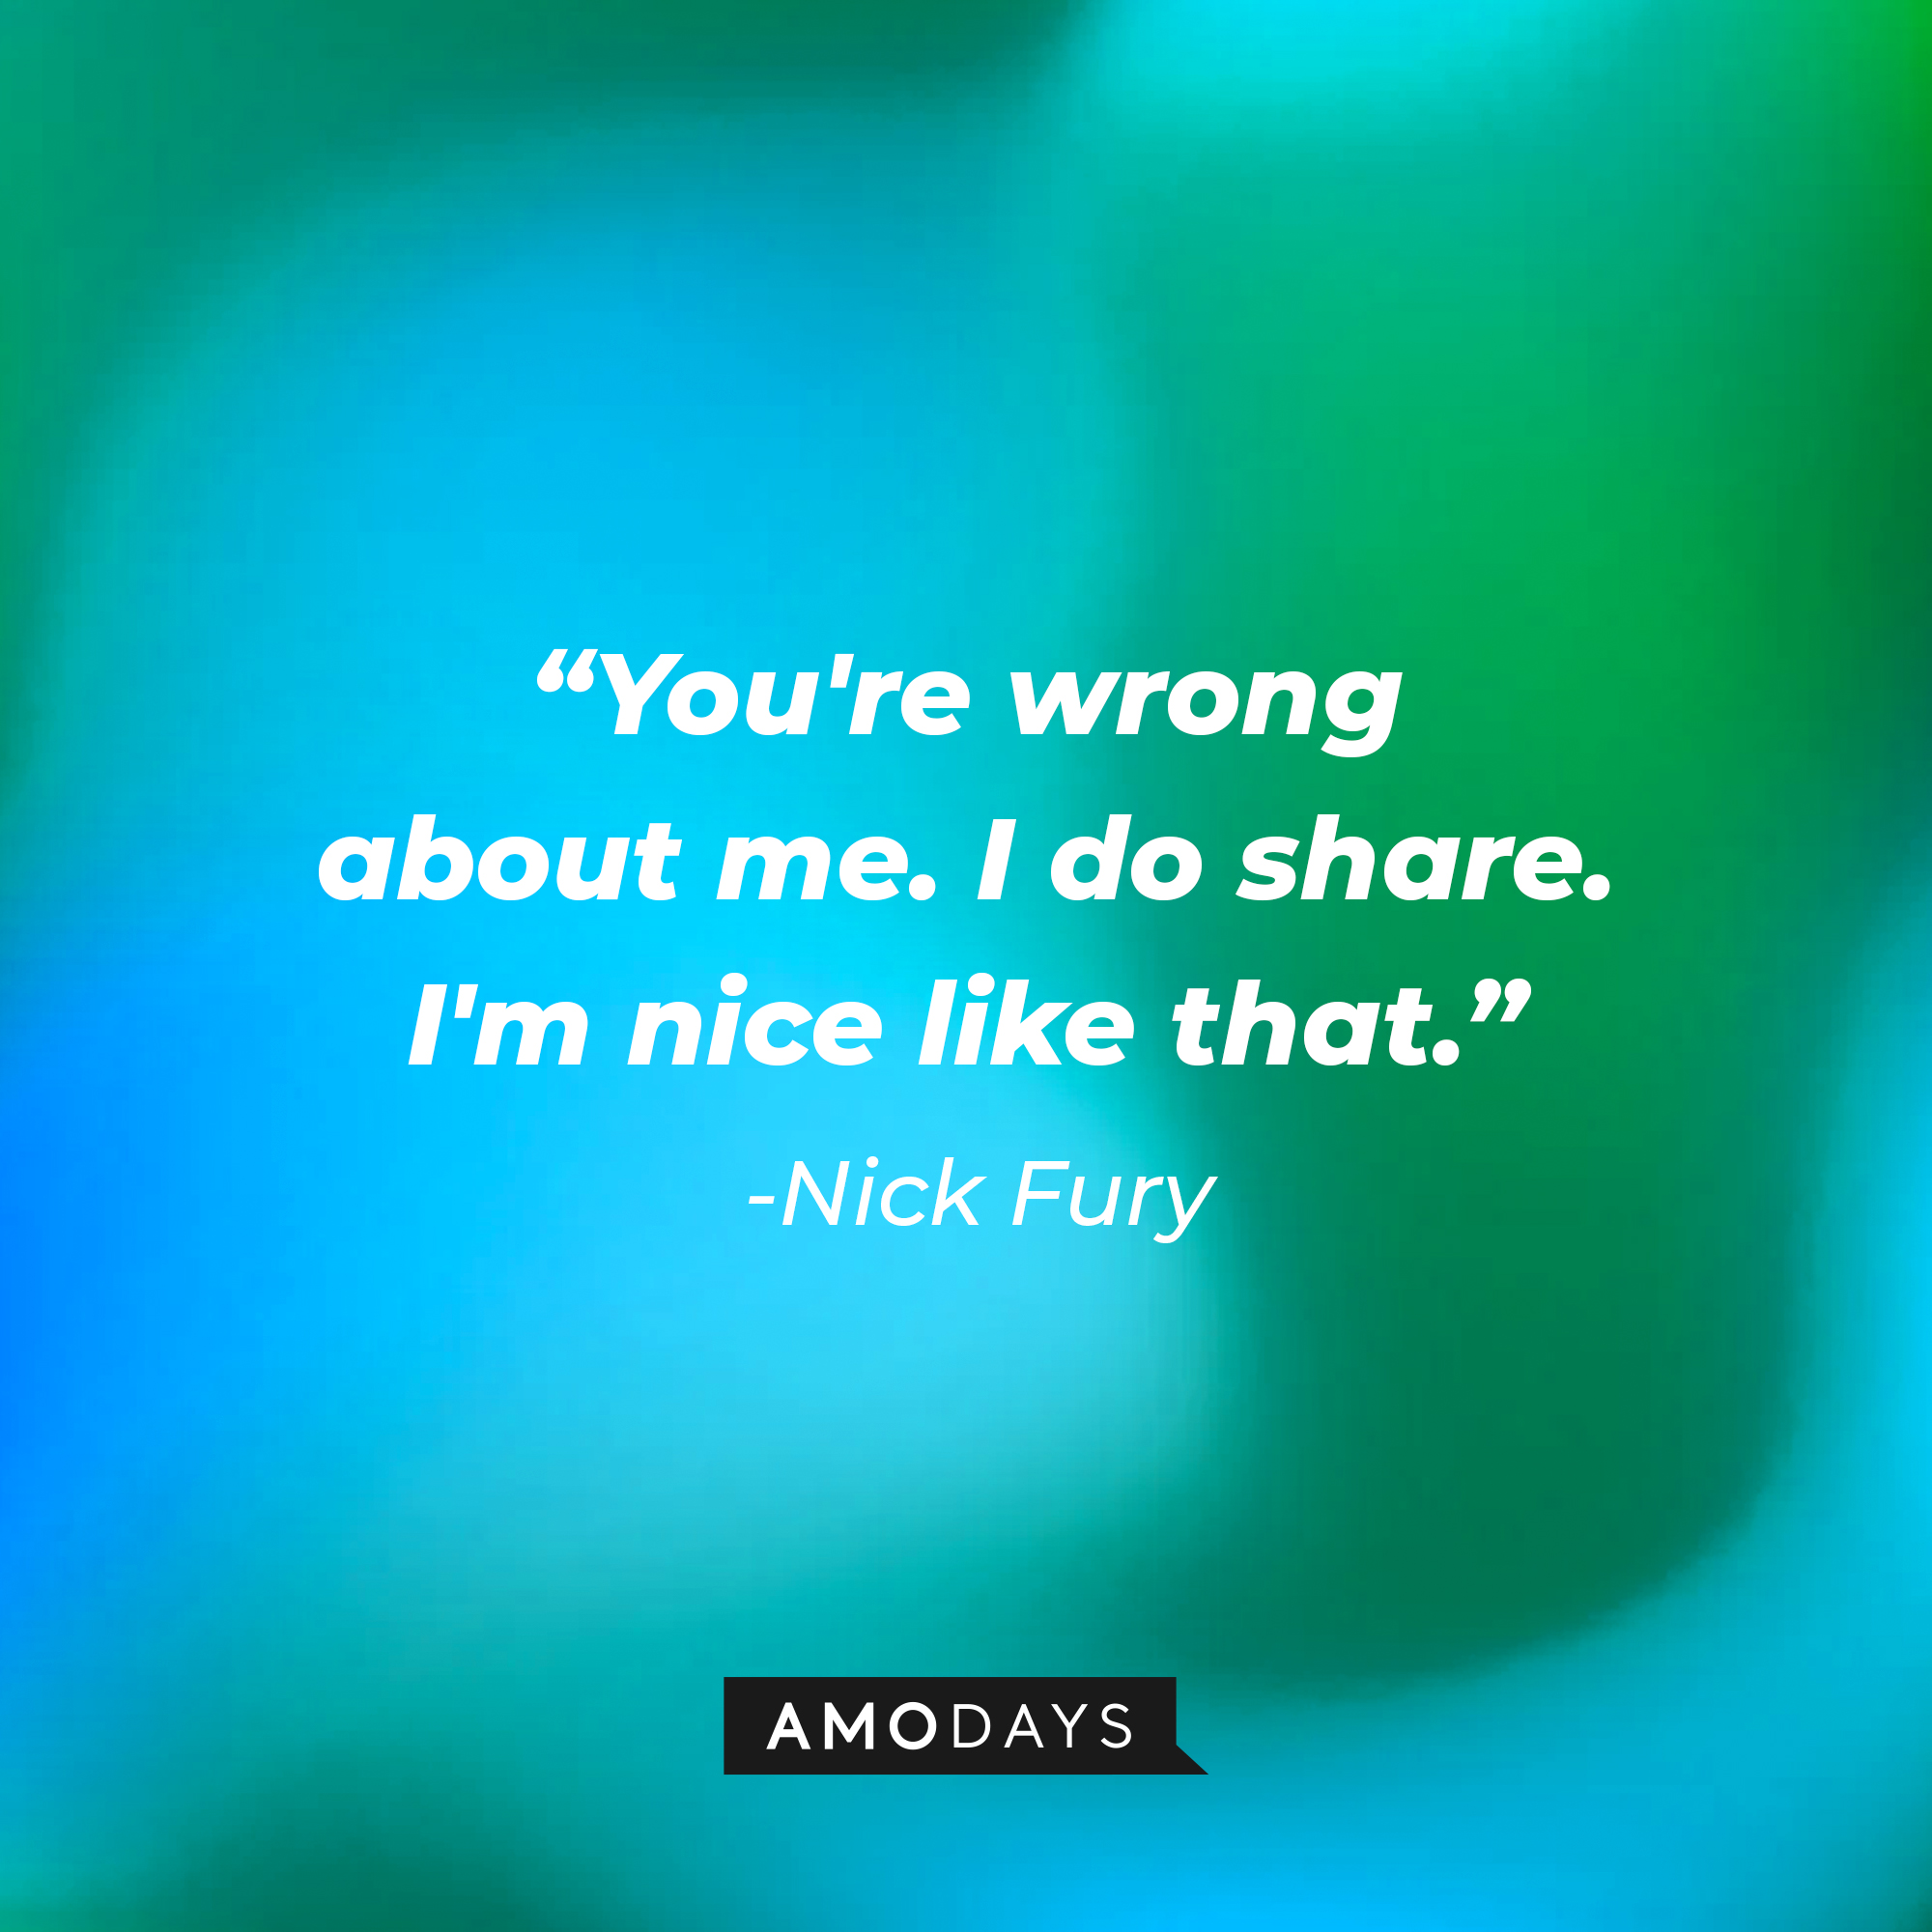 Nick Fury's quote: "You're wrong about me. I do share. I'm nice like that." | Source: AmoDays